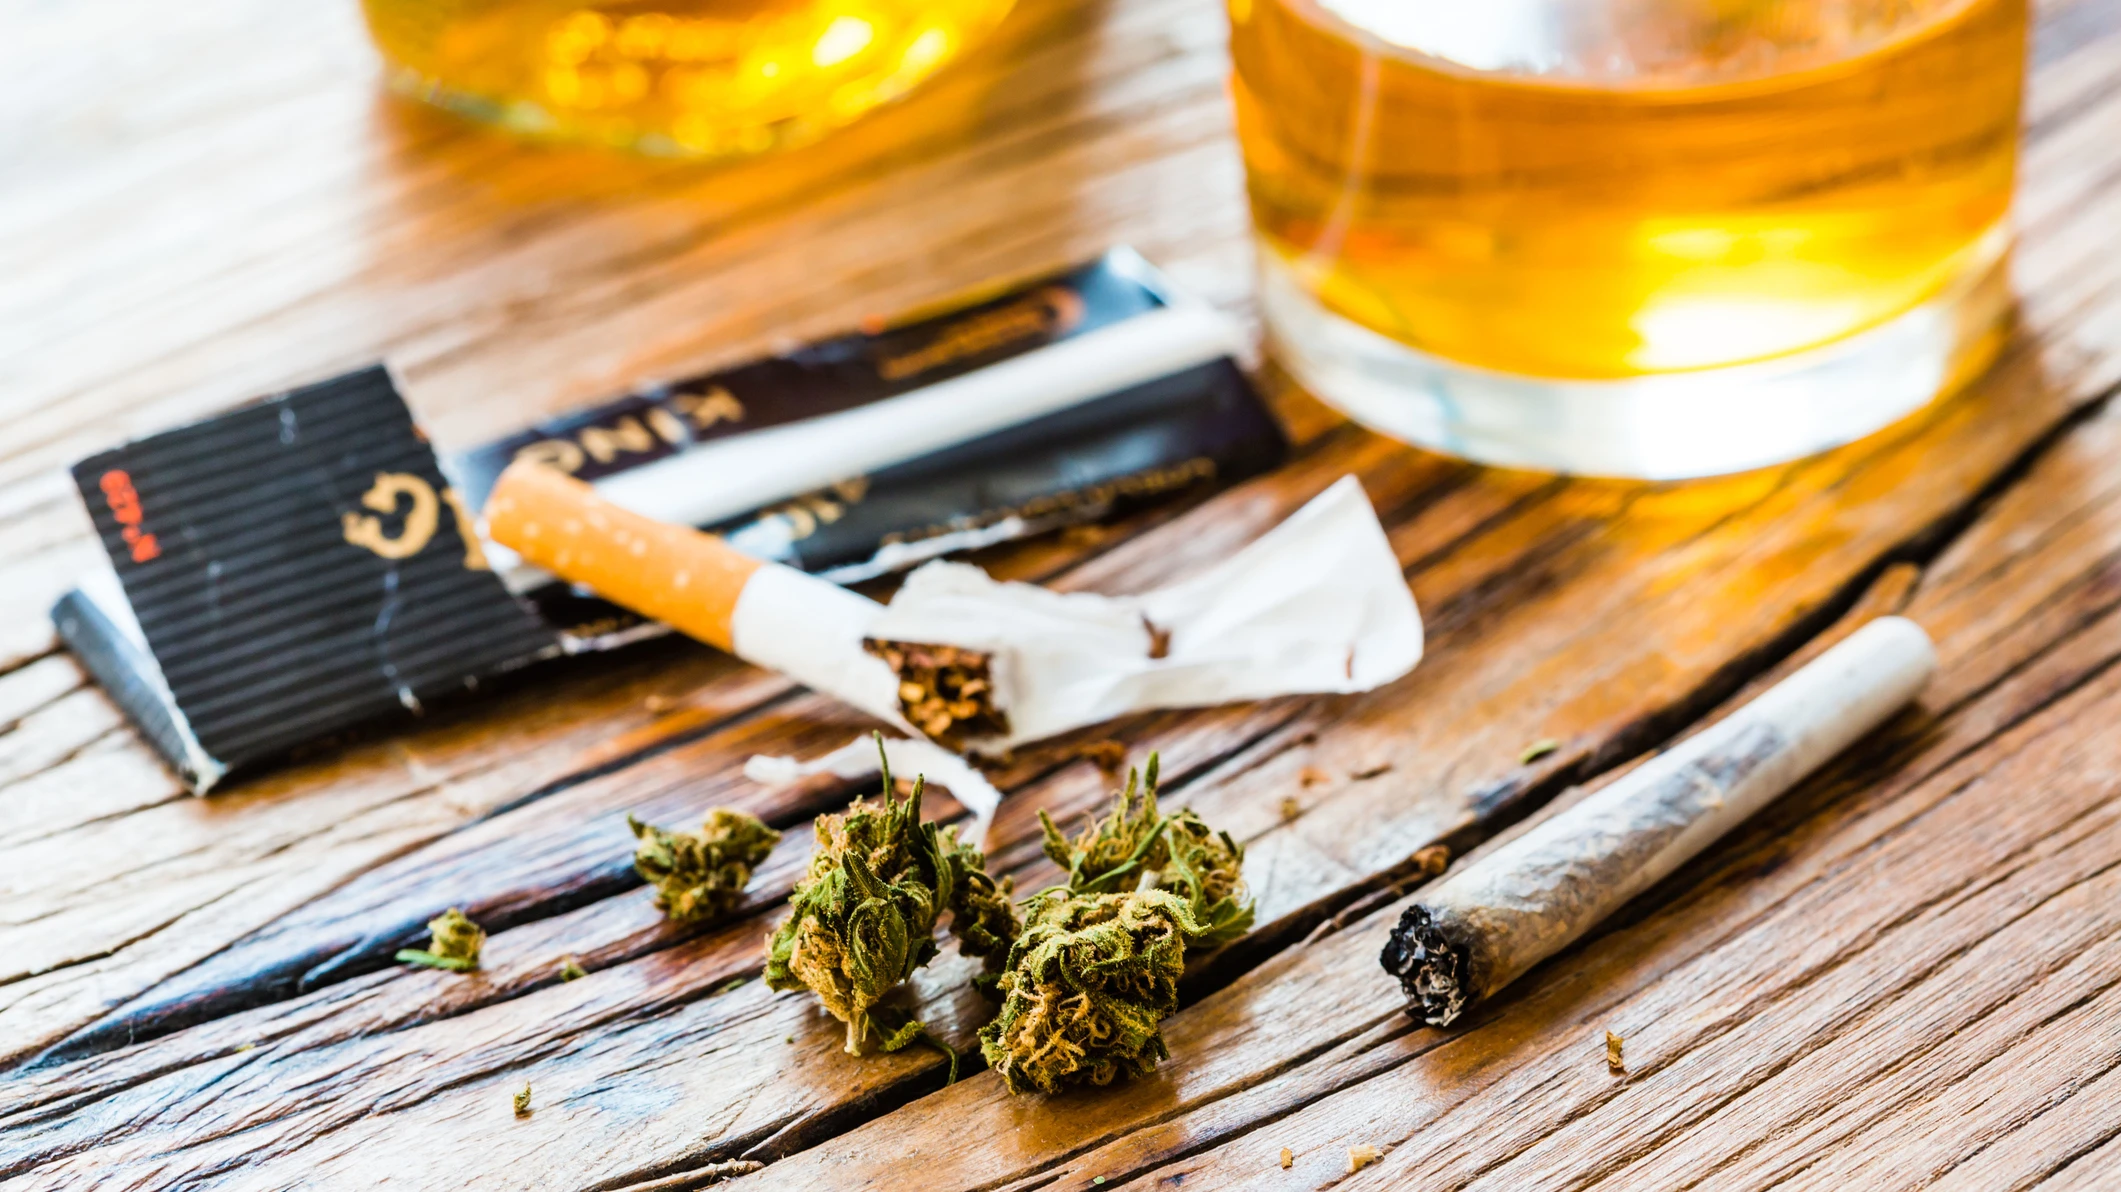 Risks of Mixing Cannabis and Alcohol